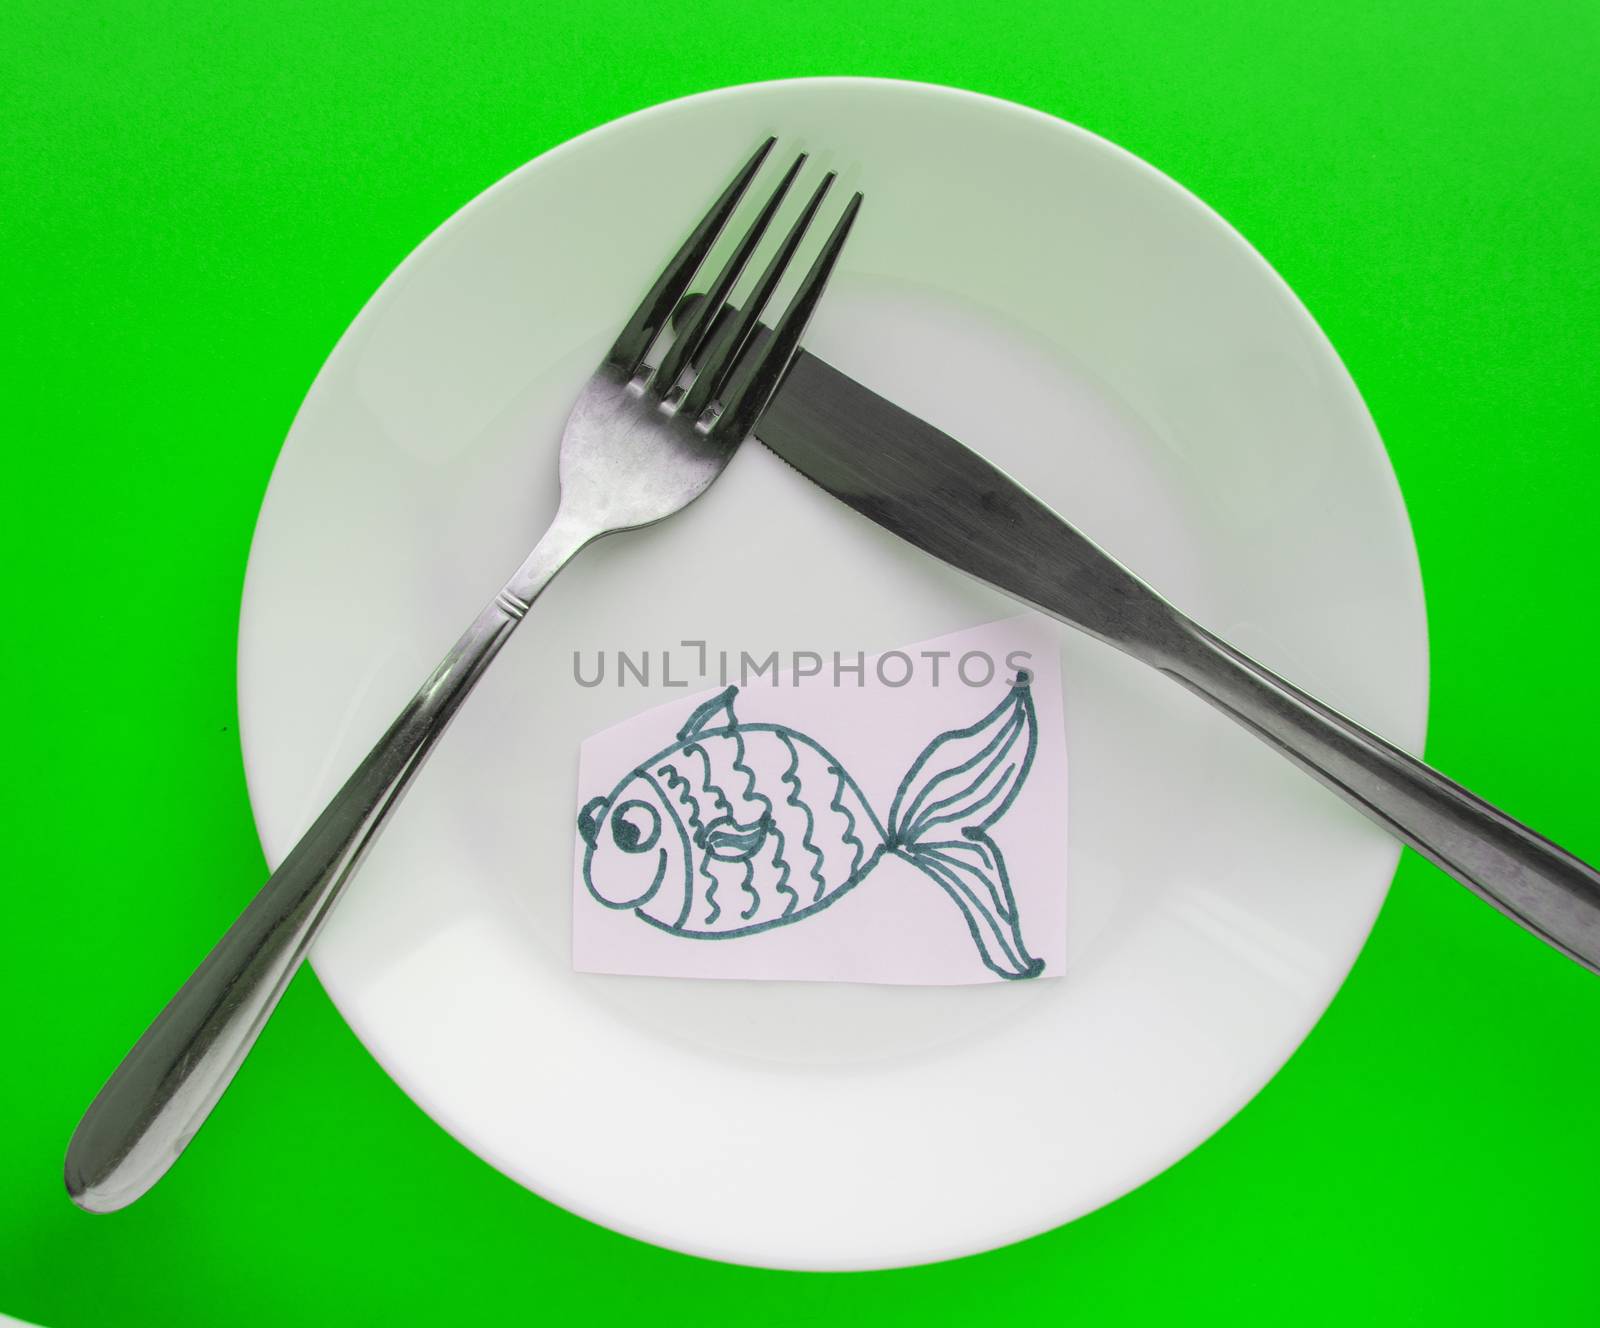 The celebration of April fool's Day, a Plate with a fork and knife and a paper fish on a green background. Humor.